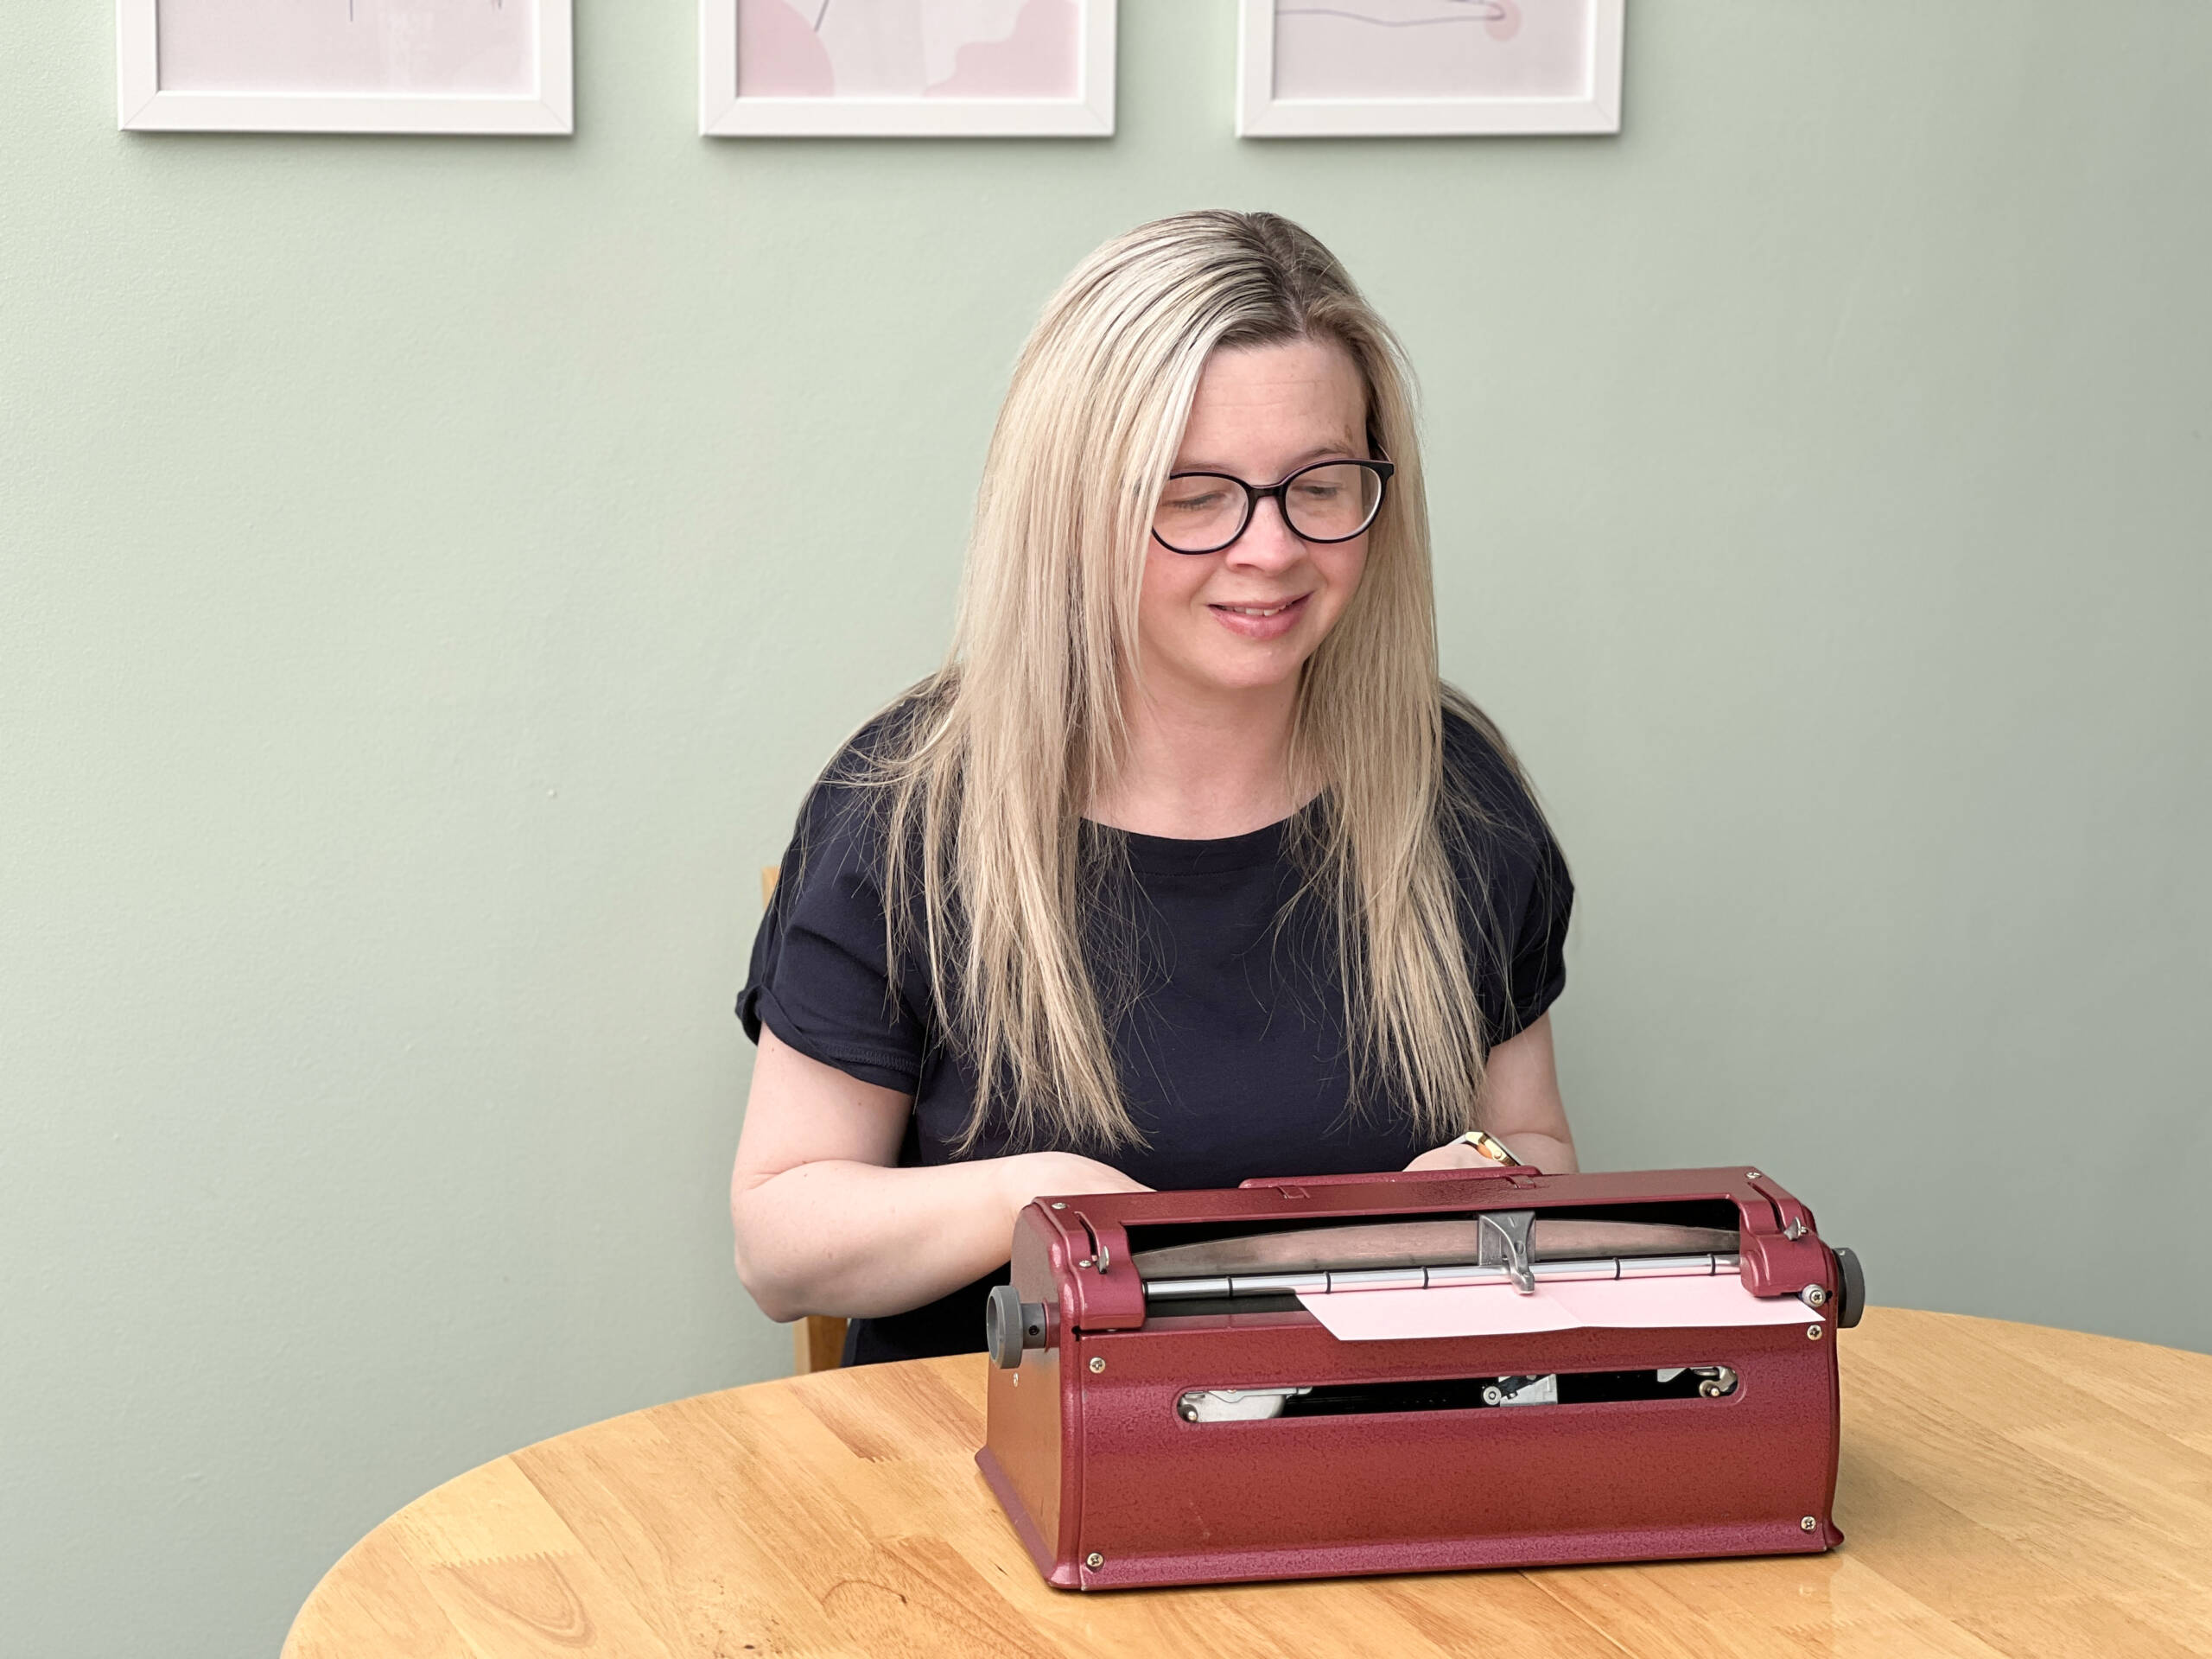 Owner of Dotty About Braille Hayley Kellard, a white woman with long, blonde hair wearing glasses, sits at a red Perkins Brailler working on a card